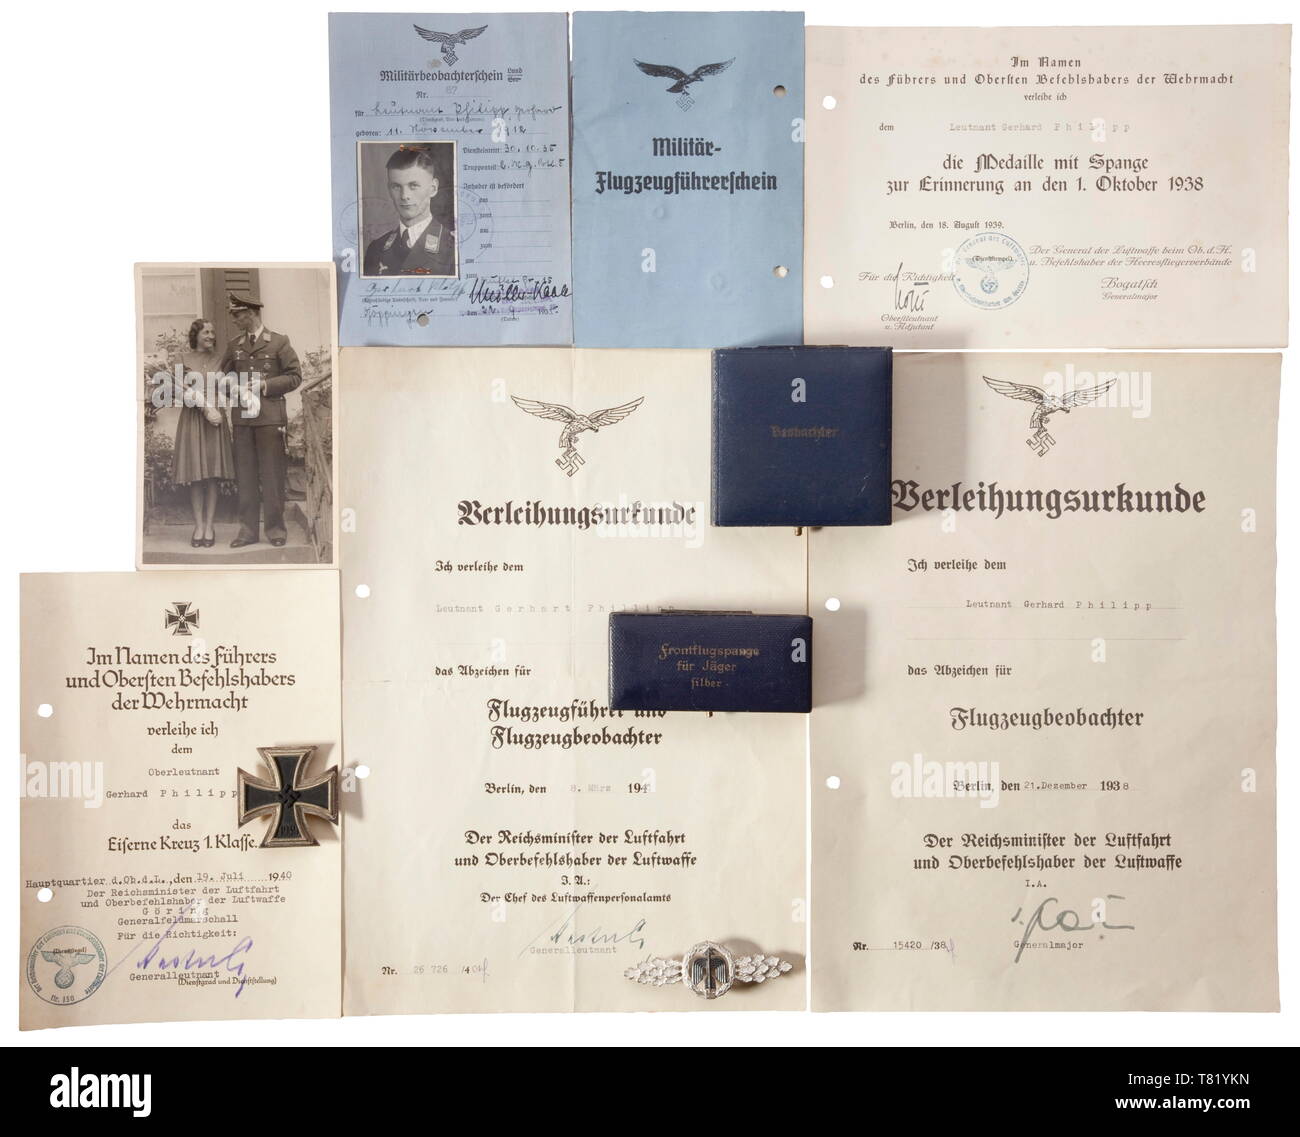 Group Captain Gerhard Philipp - III./JG 26 'Schlageter'. A Squadron Clasp for Fighter Pilots in Silver (swastika ground), cased, an Iron Cross 1st Class of 1939 of maker 'L/12' with award document dated 19 July 1940, document for the Aerial Observer's Badge 1938 with blue award case for the decoration, award document for the Combined Pilot/Observer's Badge 1940, document for the Commemorative Medal of 1 October 1938 (Sudetenland) and an appointment to Lieutenant. Also an exoneration letter for his friend Captain 'Pips' Priller regarding the alleged shooting of English pilot, Editorial-Use-Only Stock Photo